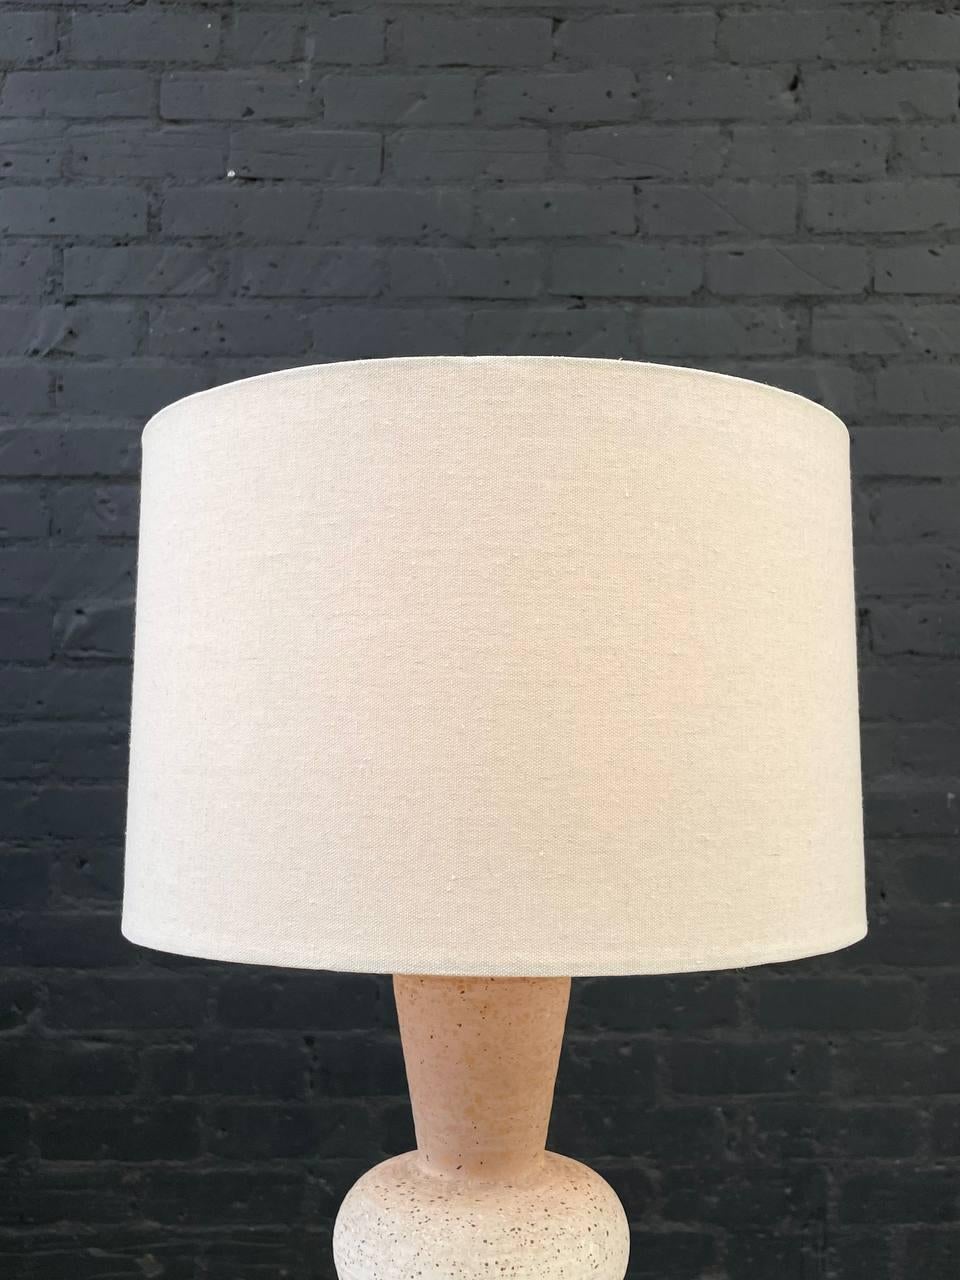 American Mid-Century Modern Hourglass Ceramic & Brass Table Lamp For Sale